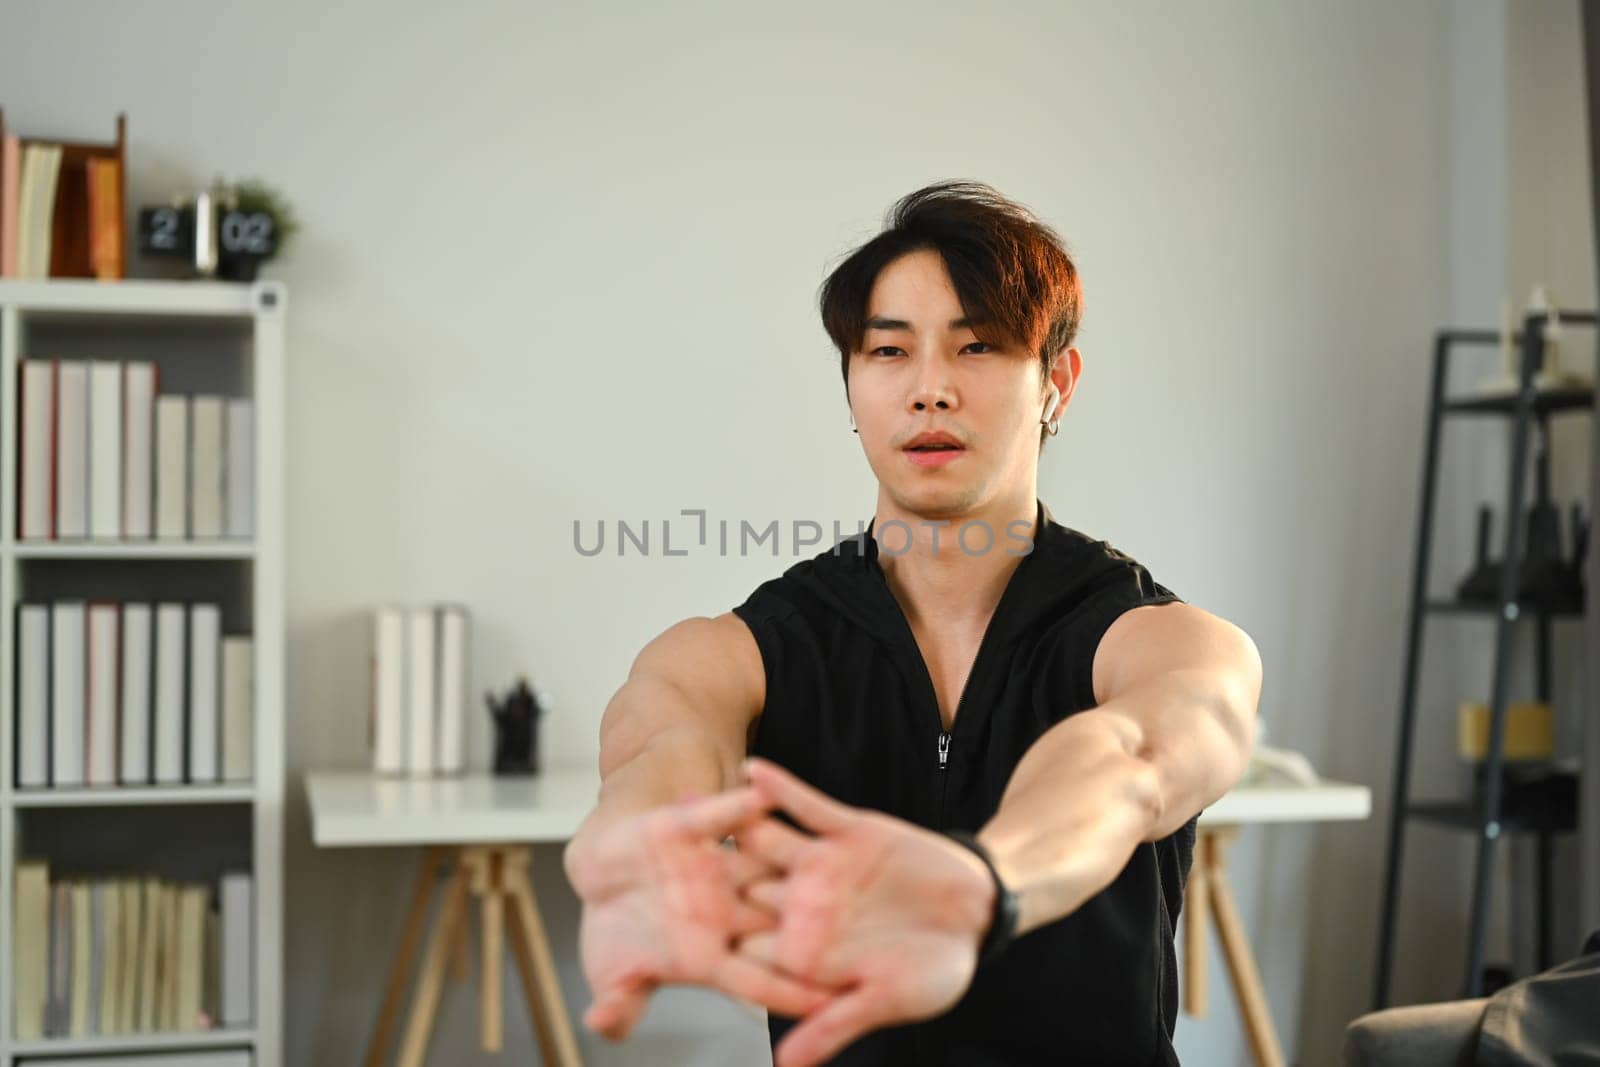 Athletic man in sportswear stretching arms before workout routine at home. Fitness, training and healthy lifestyle concept by prathanchorruangsak